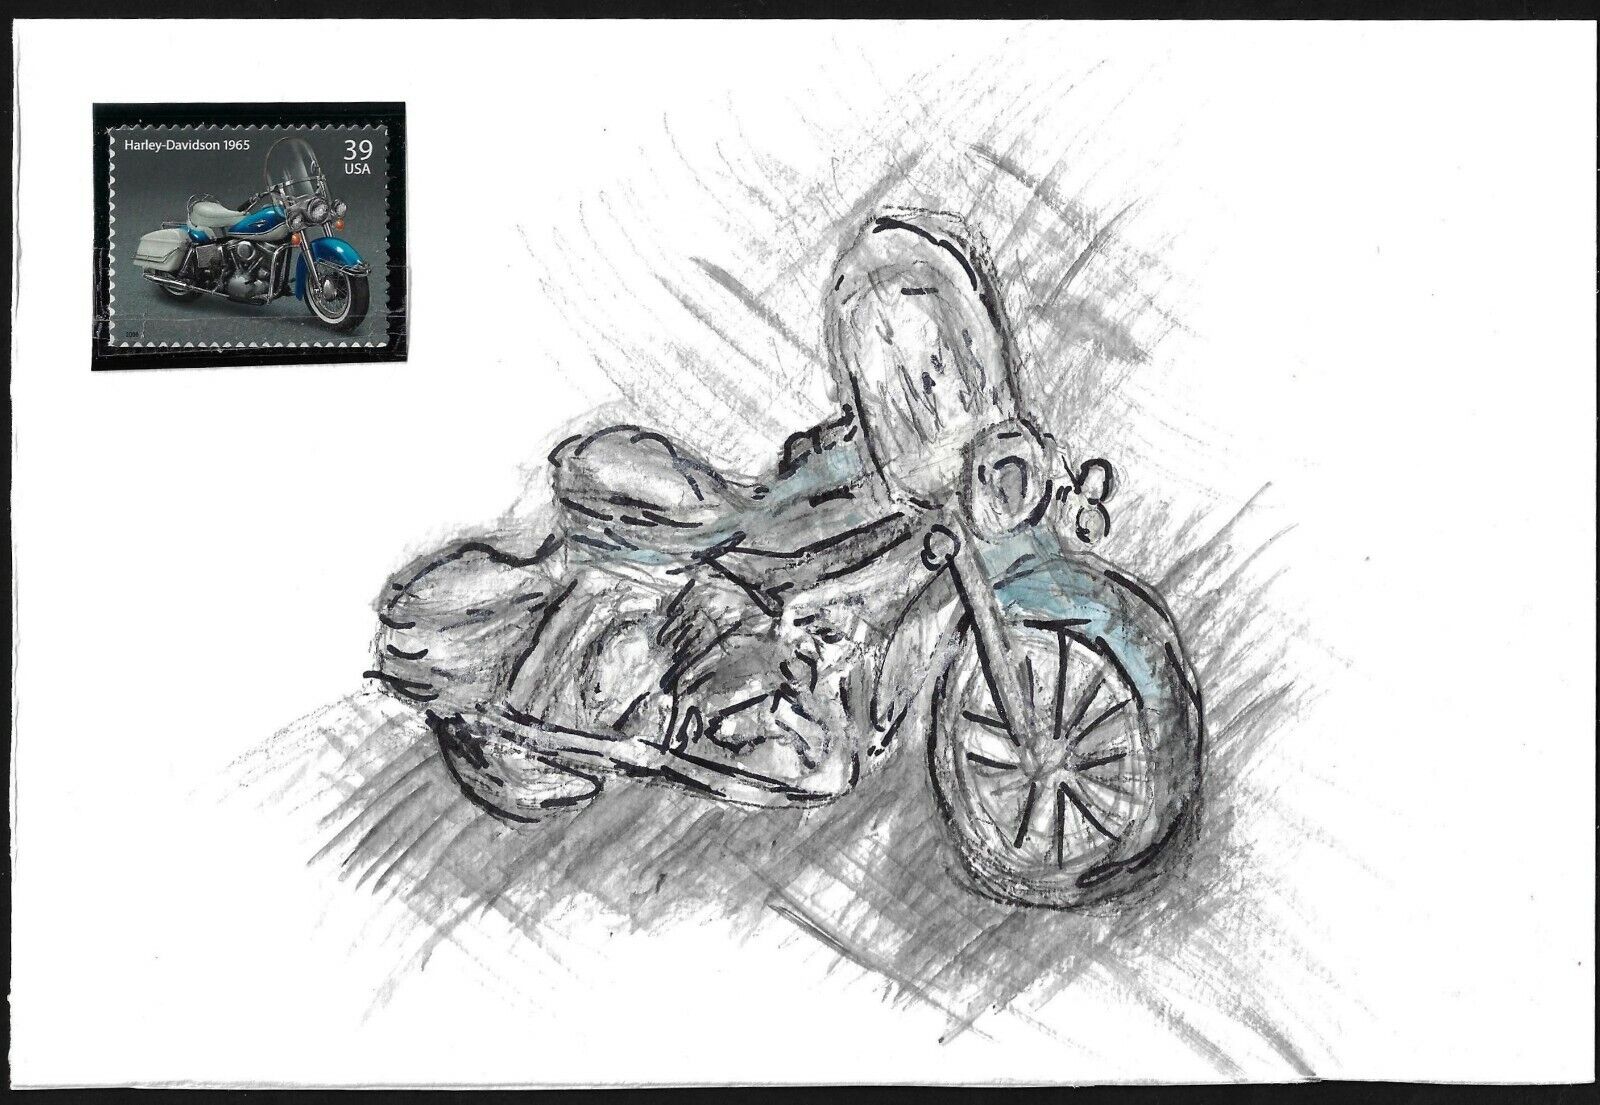 US 1965 HARLEY DAVIDSON CLASSIC BLUE ELECTRA GLIDE MOTORCYCLE AND STAMP